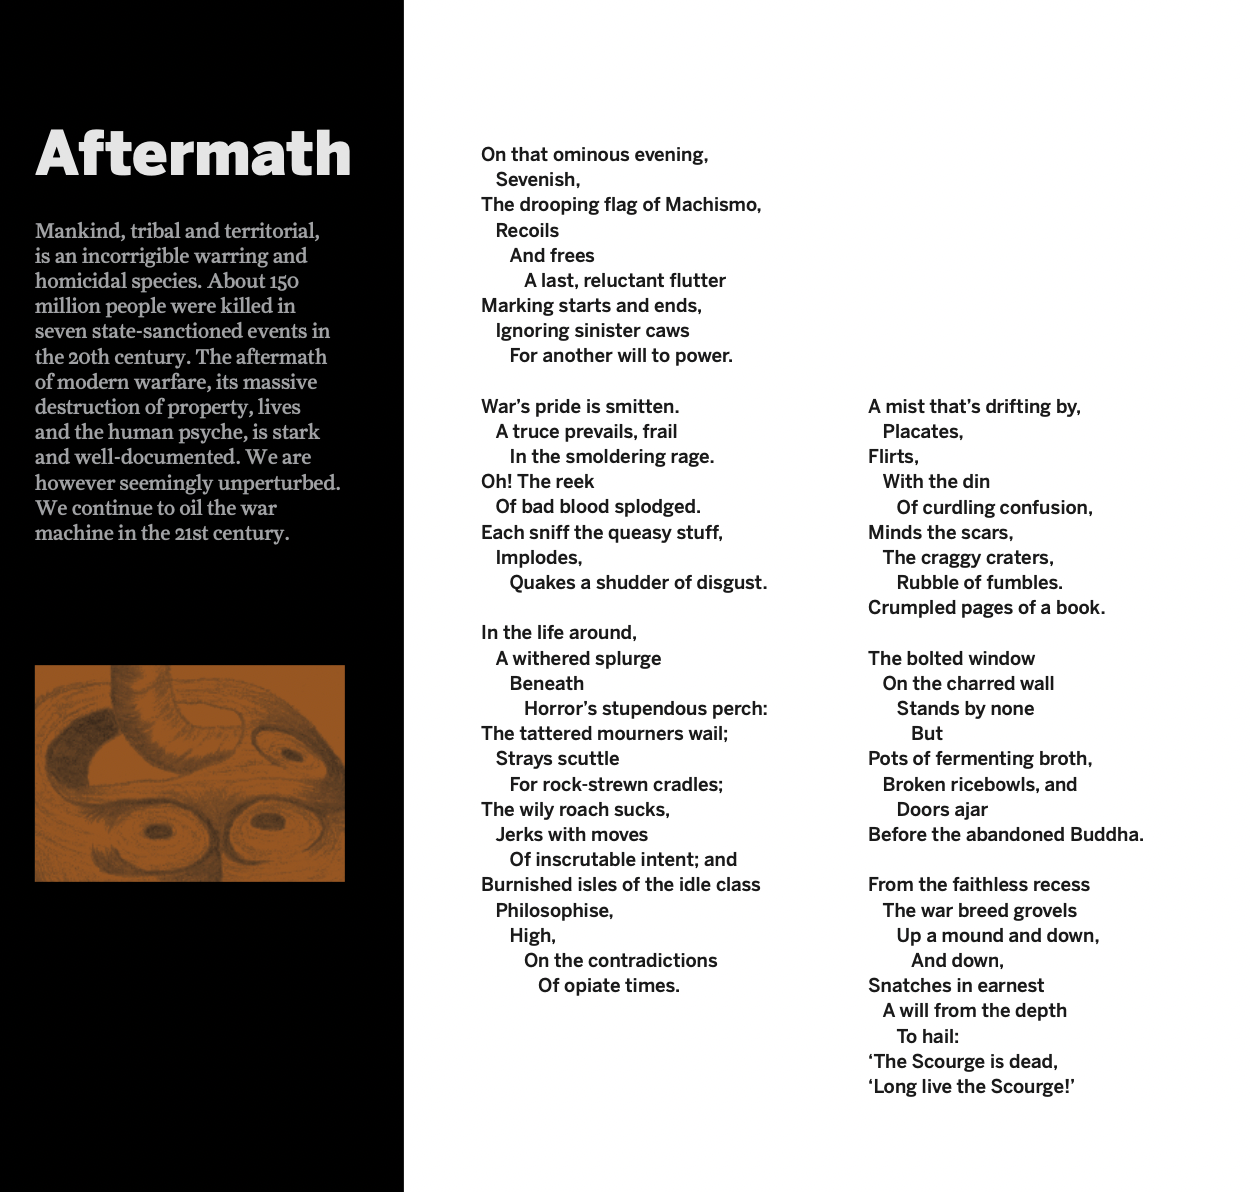 1989, 2018, 2023 and beyond: My art journey on ‘Aftermath’ continues